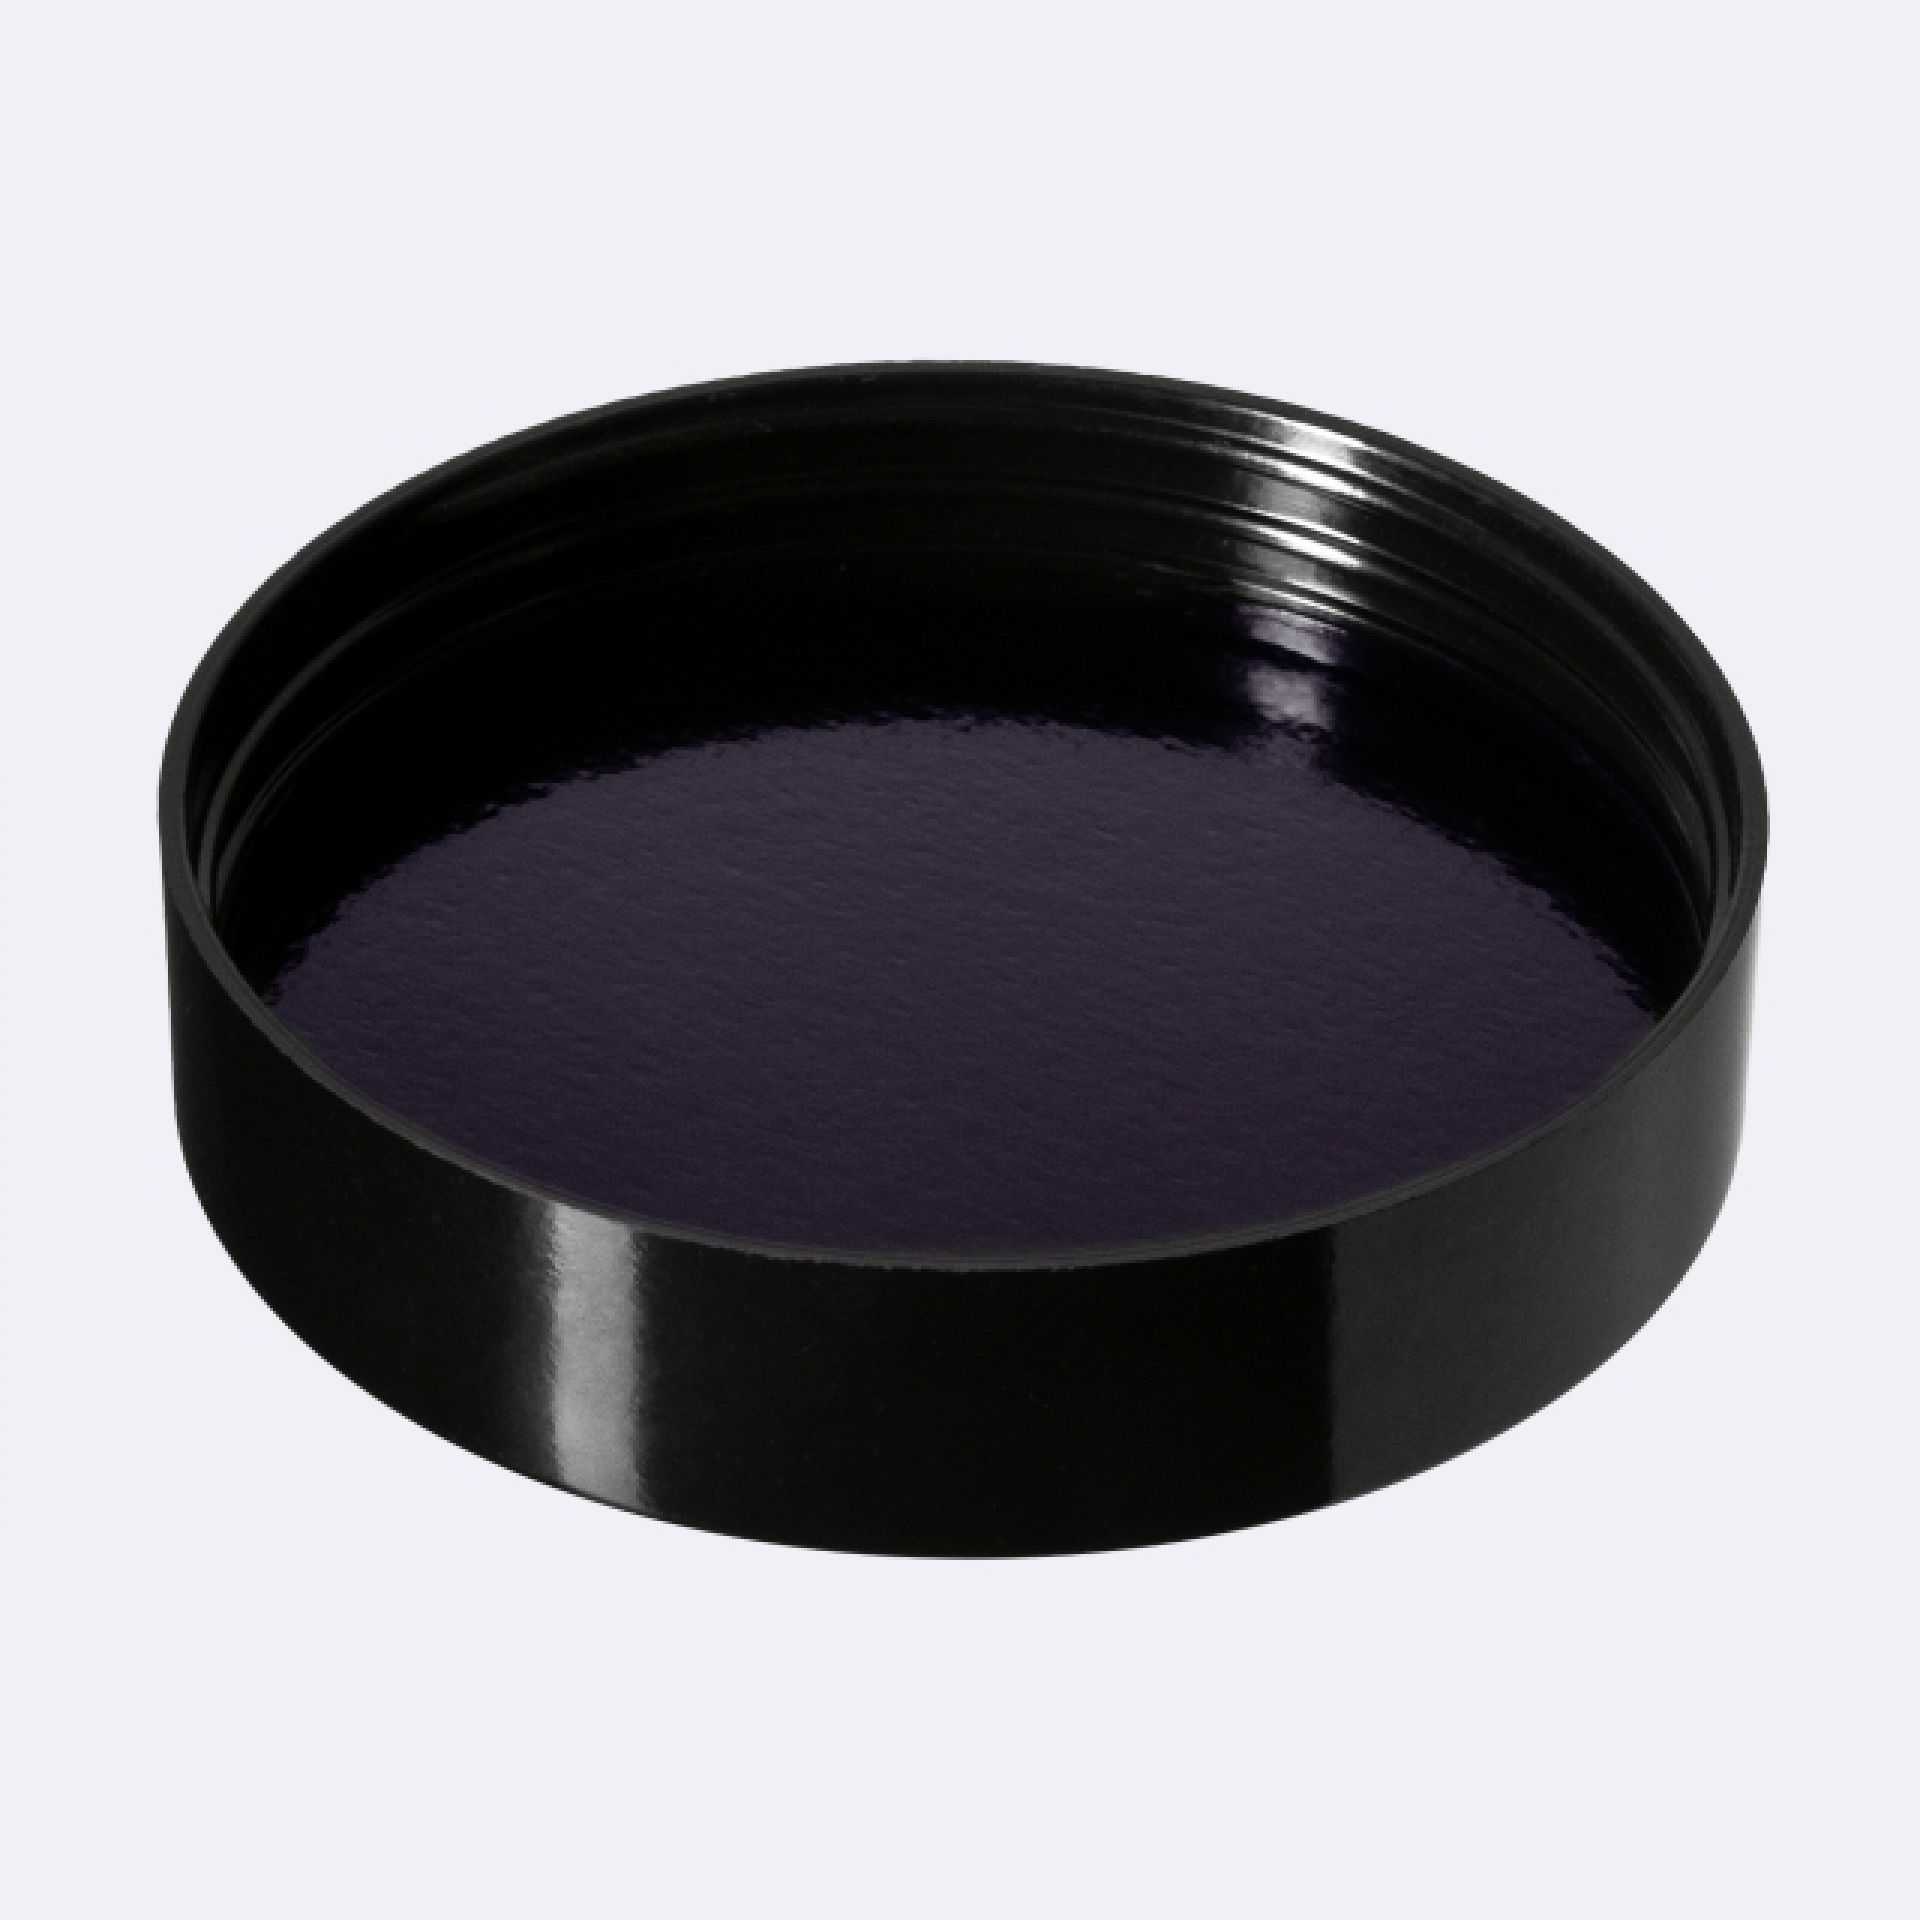 Lid Modern 72 special, PP, black, glossy finish, violet Phan inlay (Sirius 100)